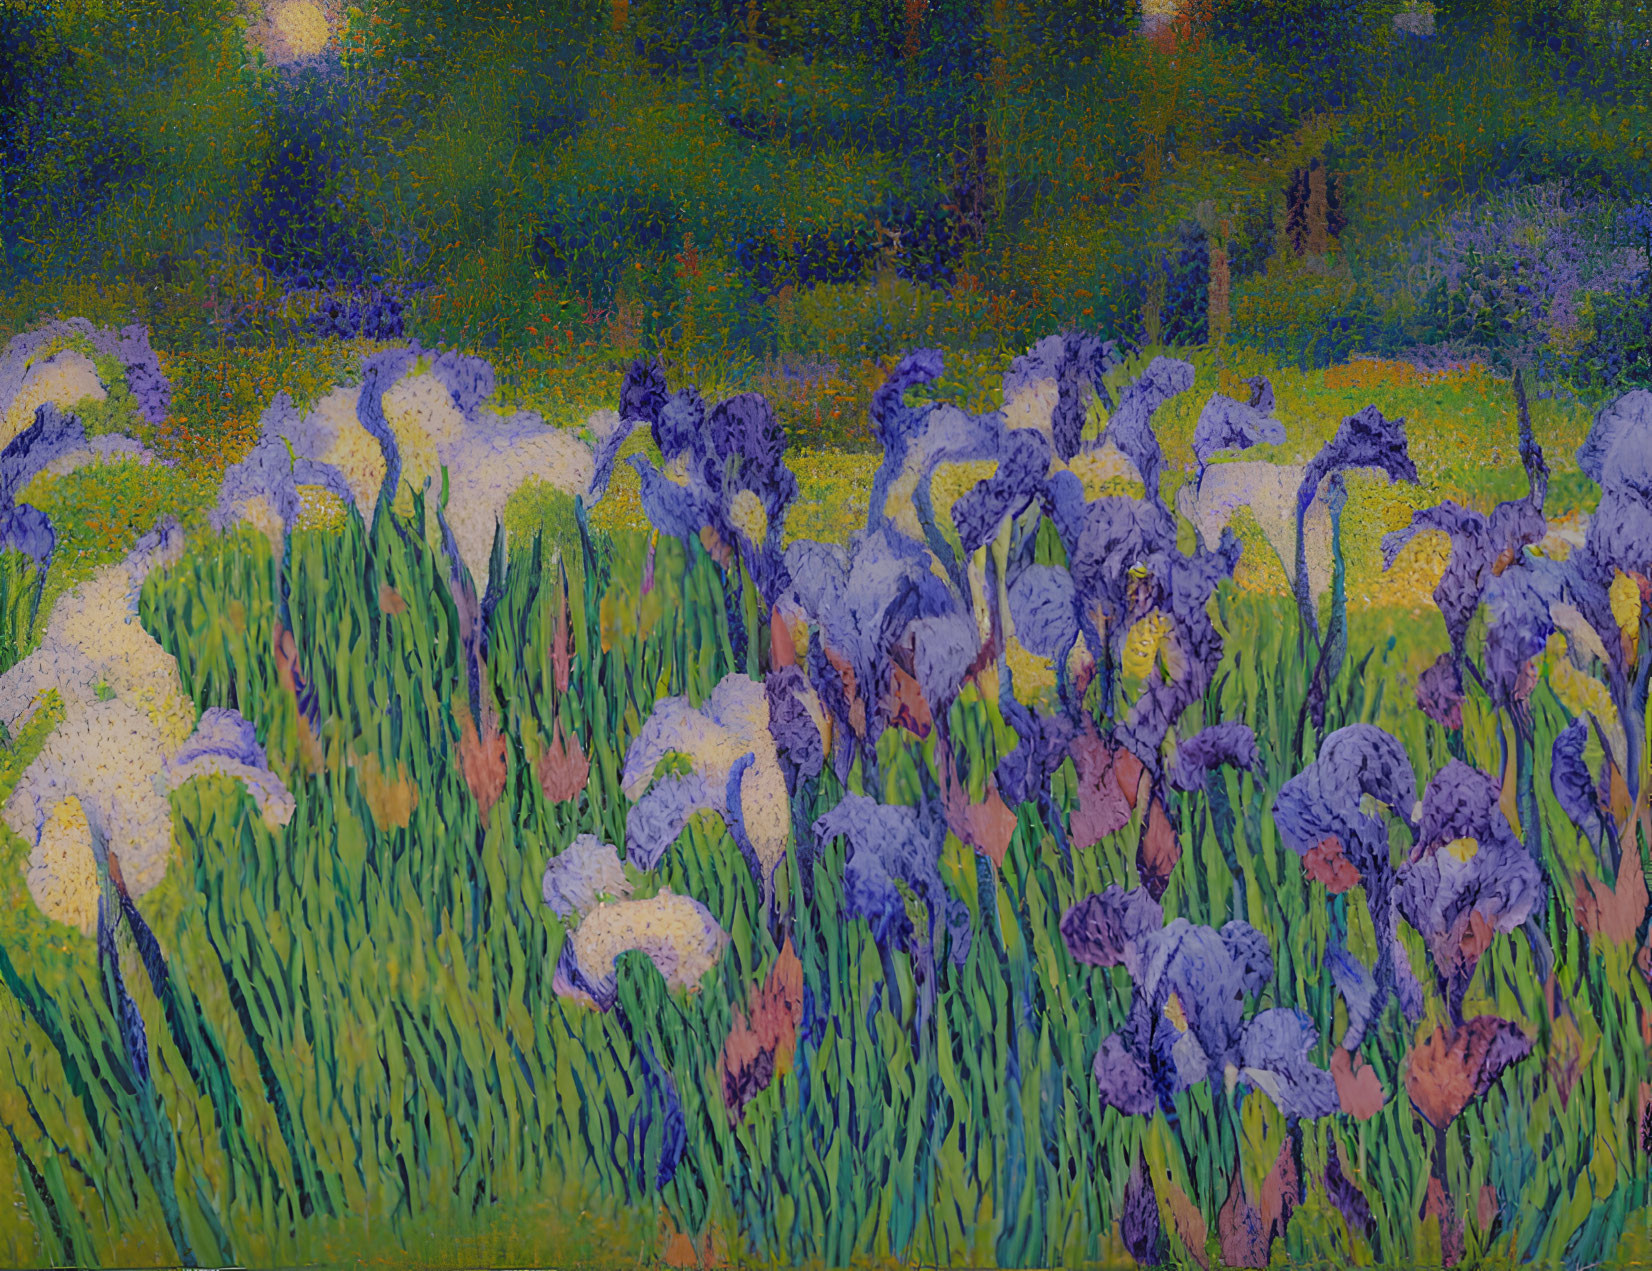 Vibrant blue and white irises in impressionist style